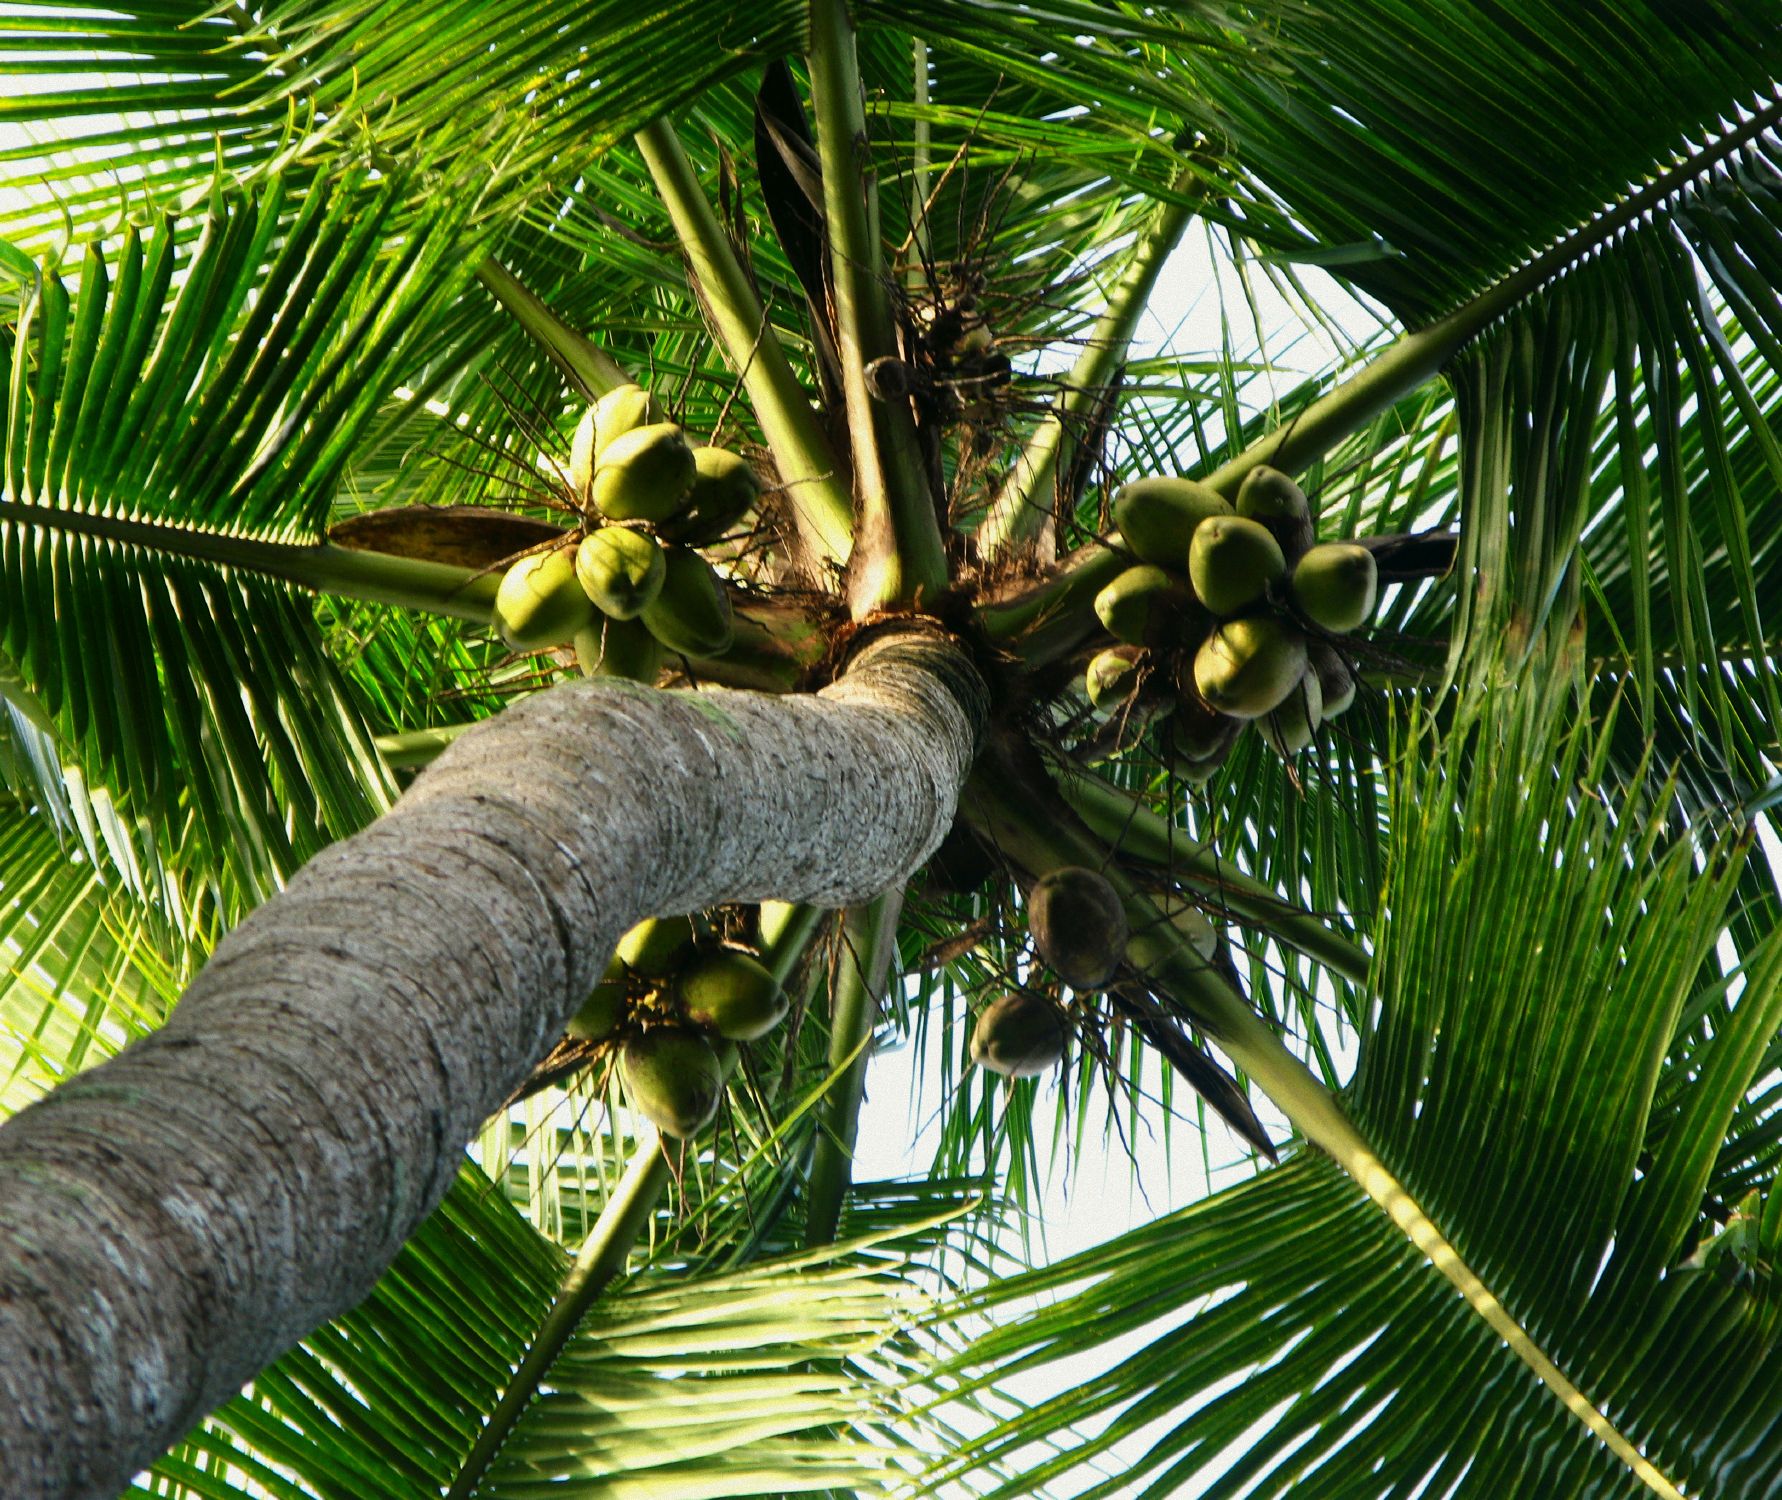 Precious Timber | What We Grow - Coconuts ... We Grow Money!